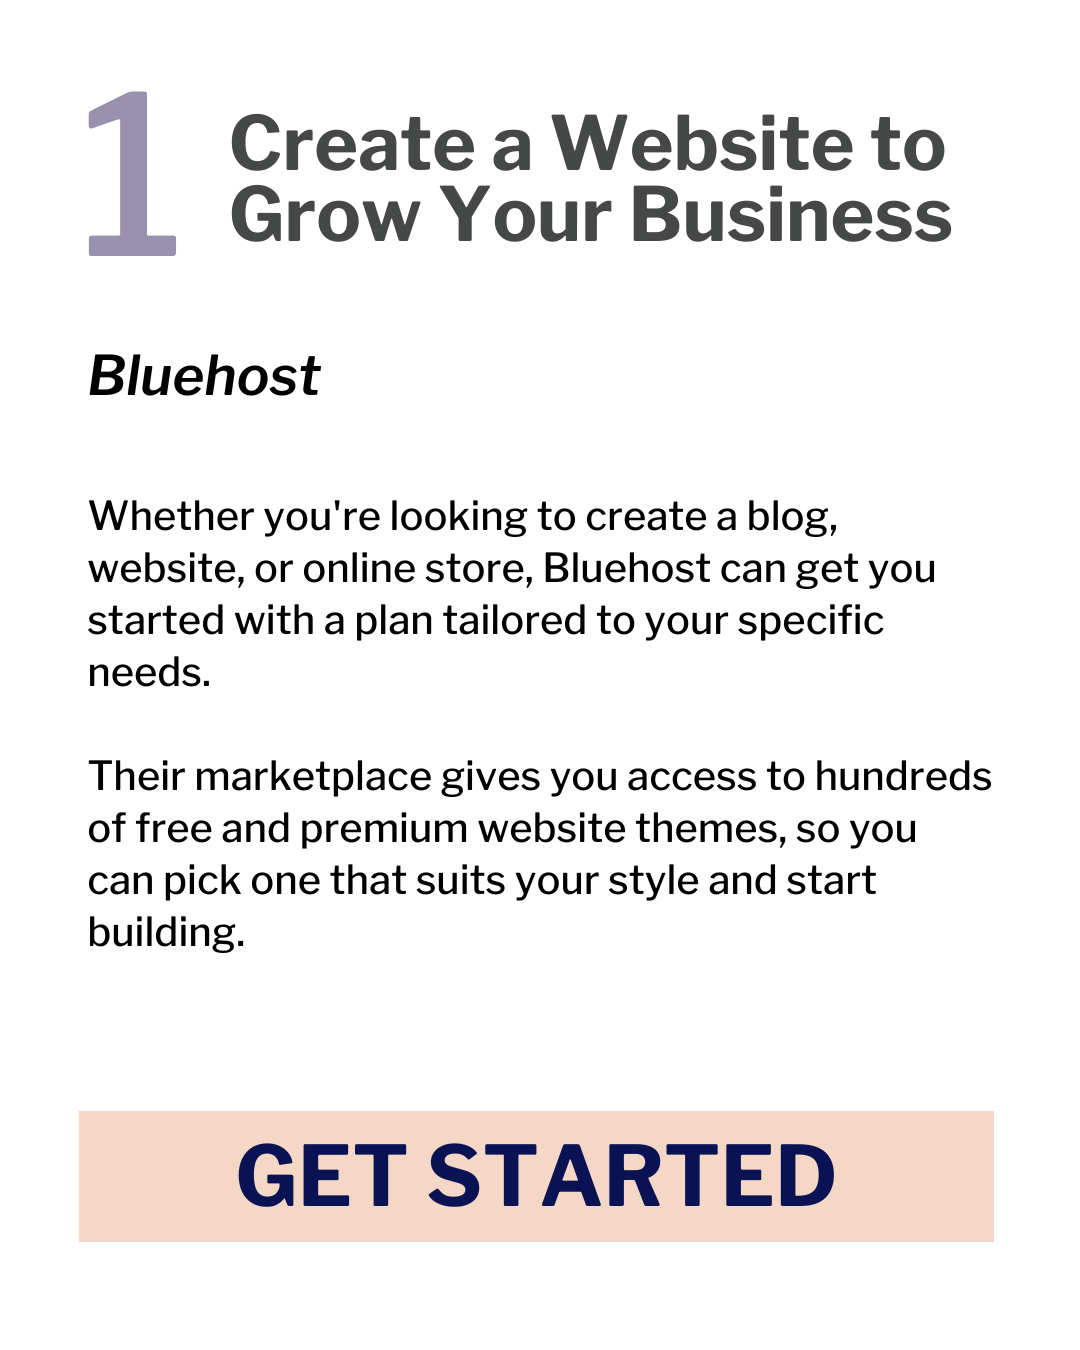 bluehost-business-tools-her-first-100k.png